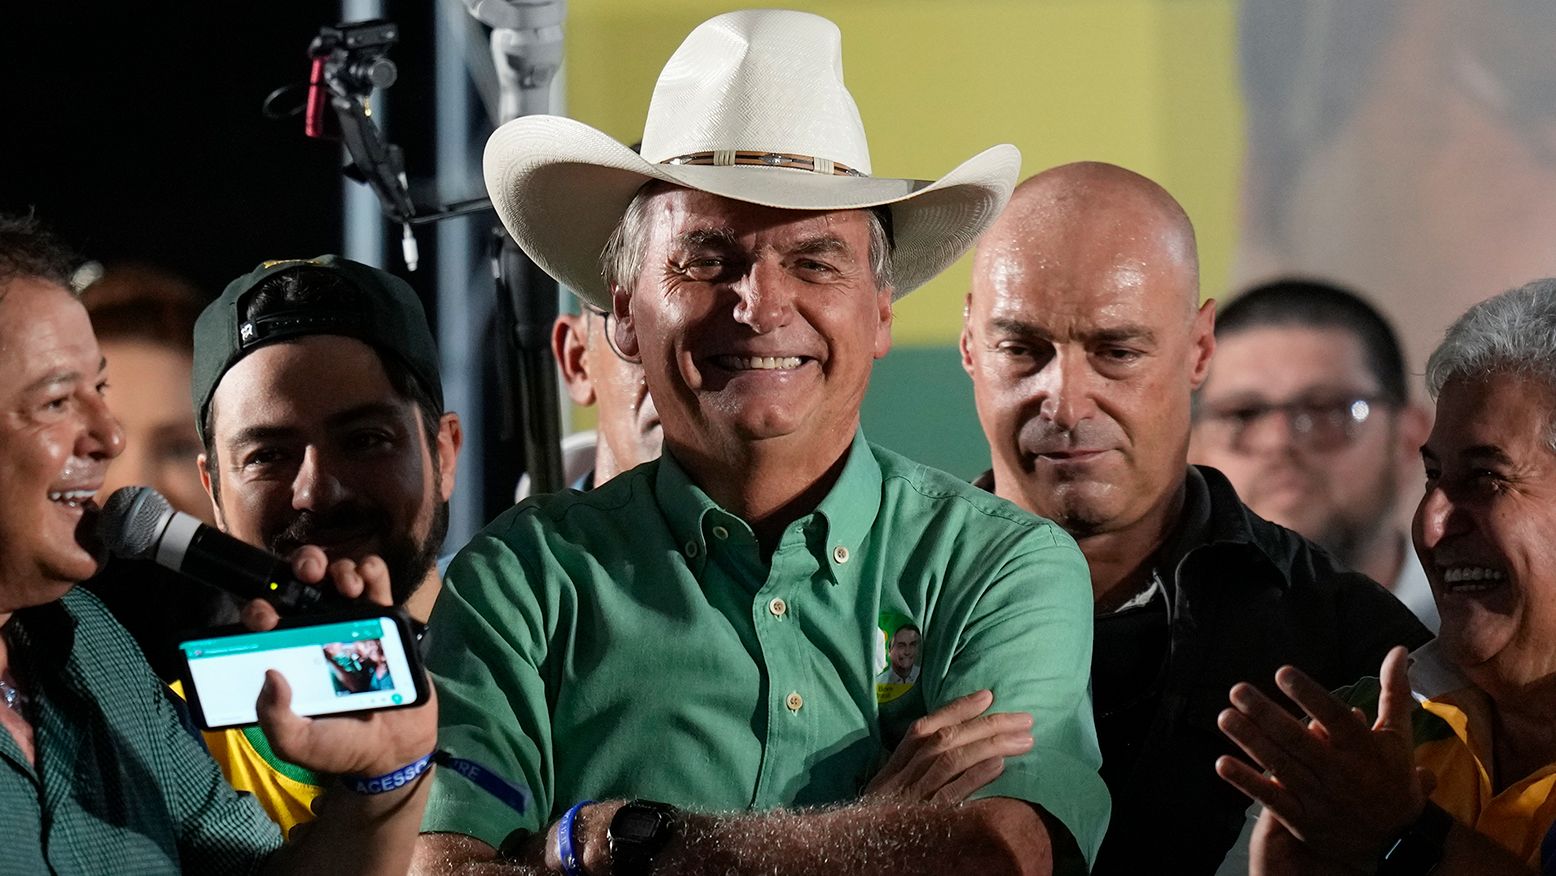 Brazil's President Jair Bolsonaro, who is running for a second term, smiles during a campaign rally in Guarulhos, the great Sao Paulo area, on October 22, 2022.